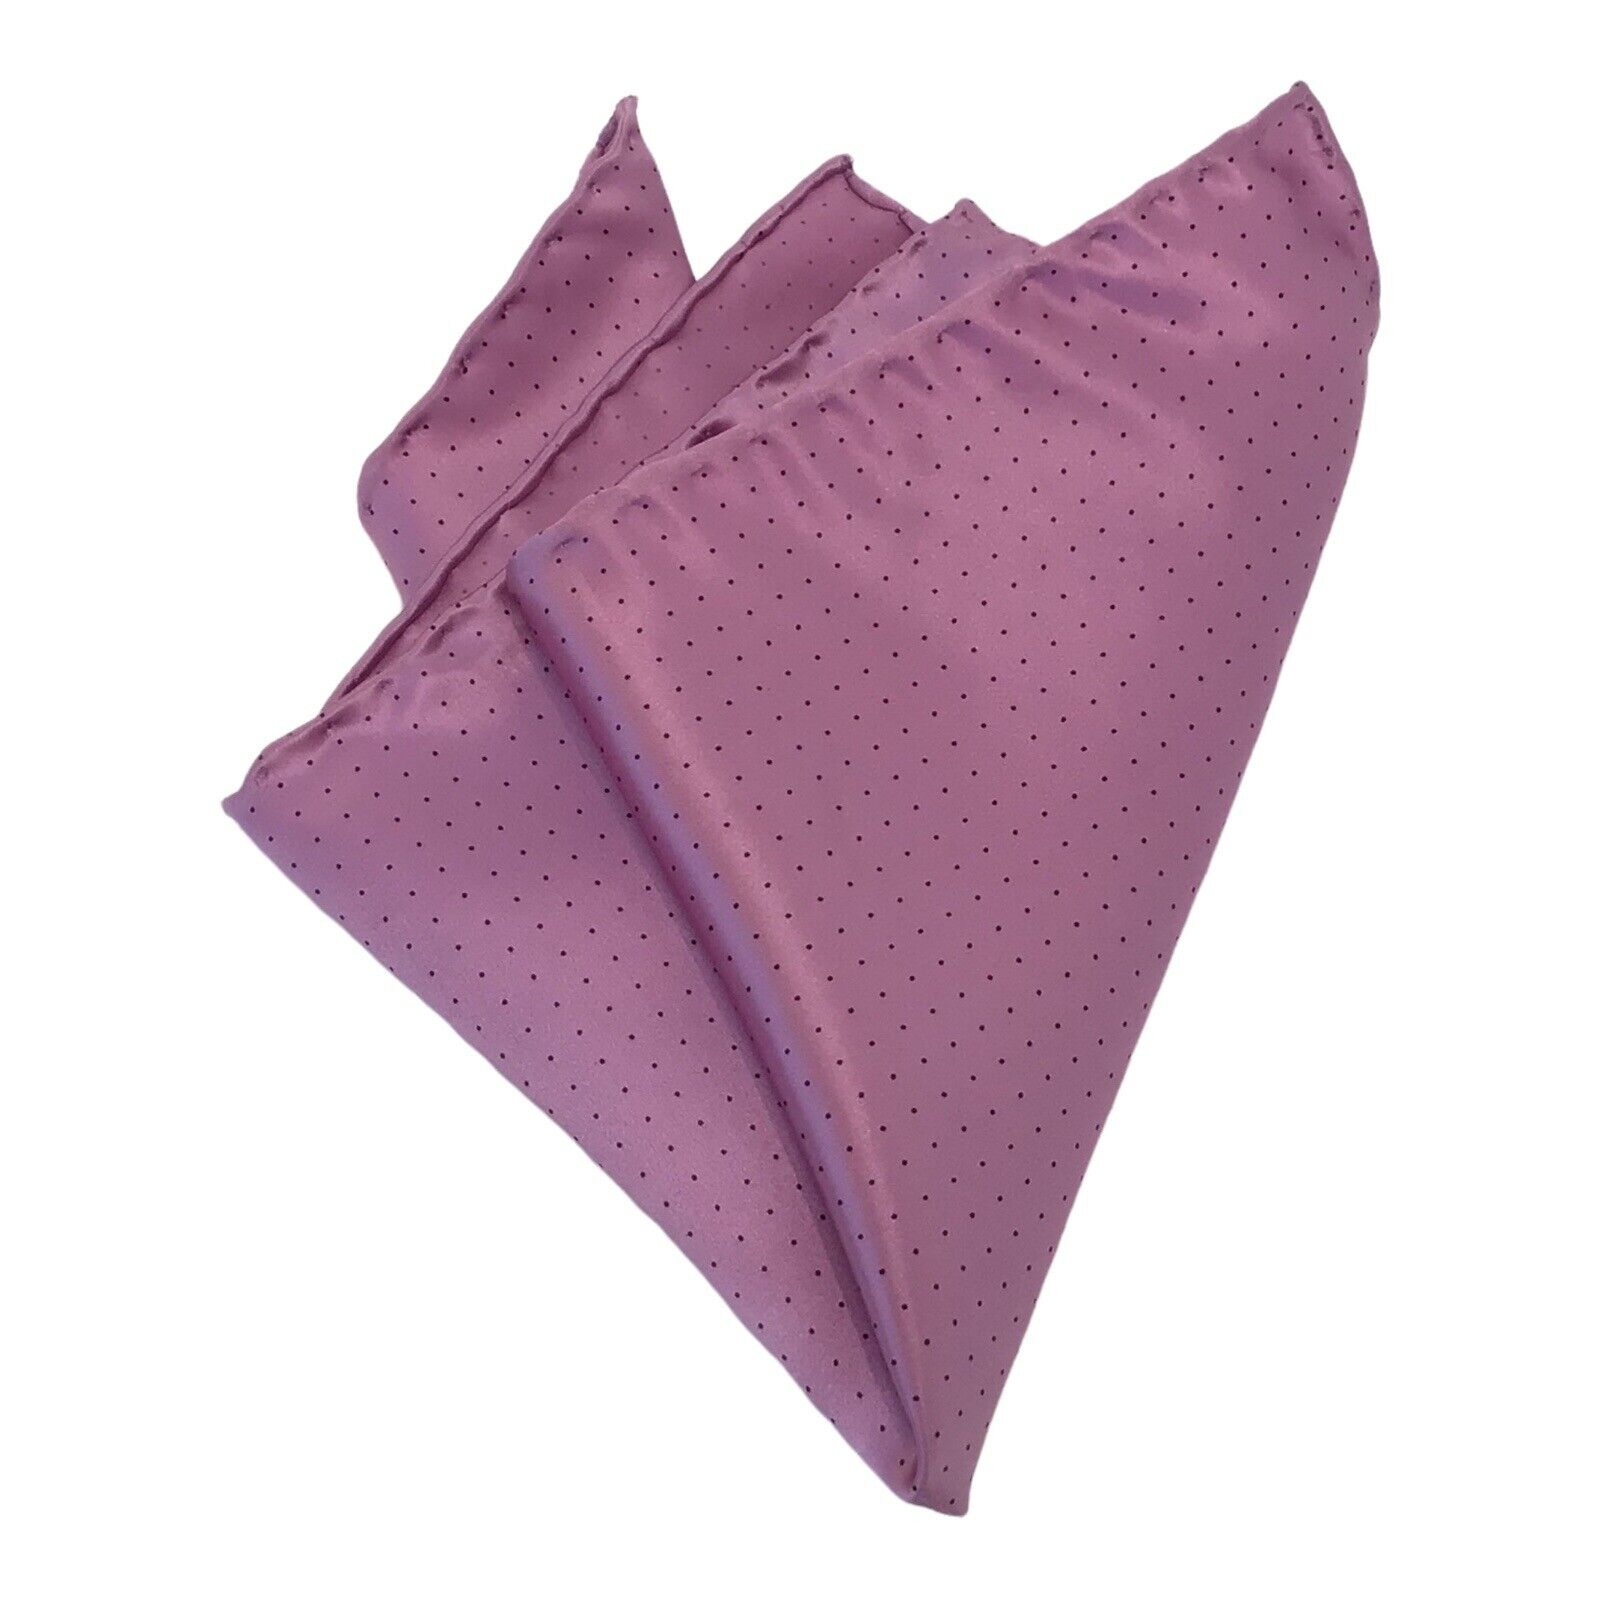 AMAZING Purple Polka Dot Pocket Square Silk H.Made In Italy 12”/11".1/2 EXC COND